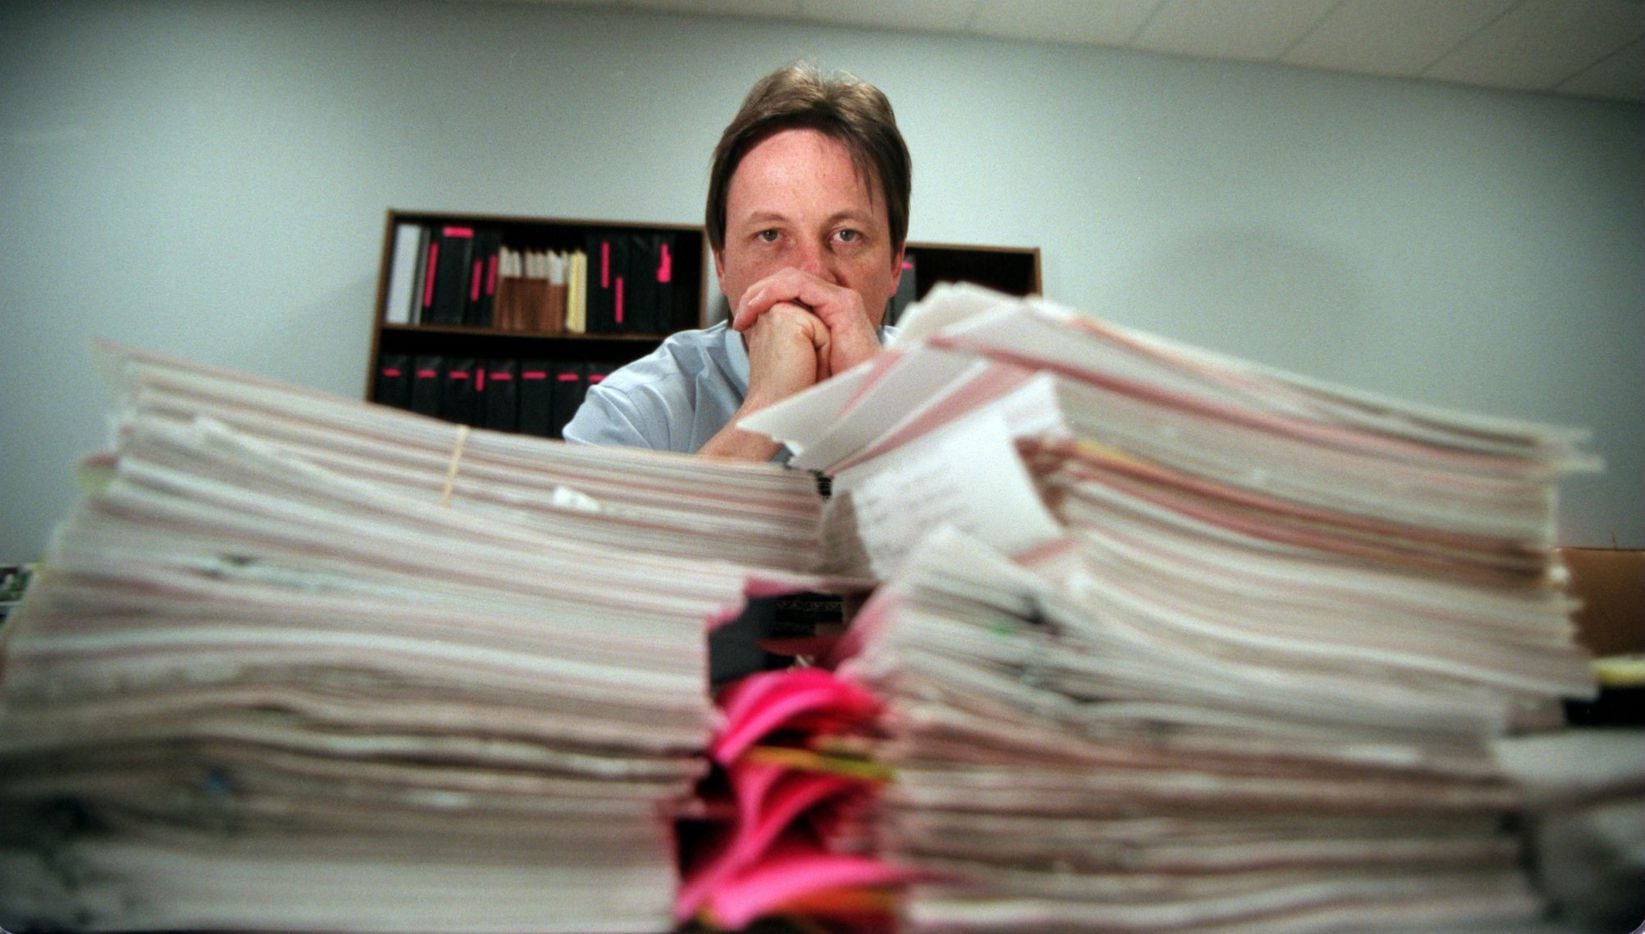 Sgt. Mark Simpson who is head of the Amber Hagerman Task Force sits behind stacks of paper containing tips from the case on March 14, 1996. Investigators said then that time was on their side and are confident they would find Amber's killer.